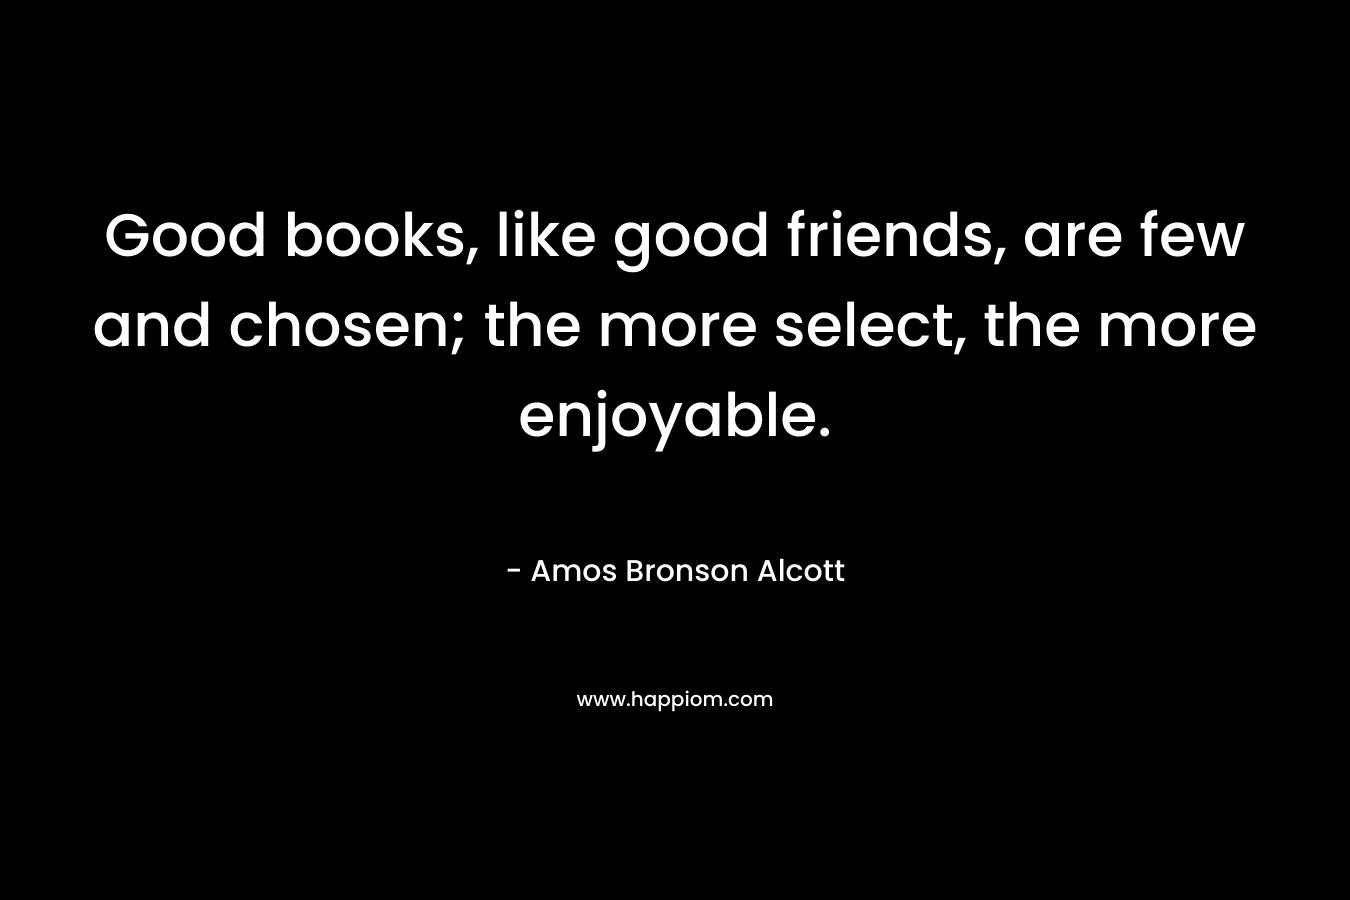 Good books, like good friends, are few and chosen; the more select, the more enjoyable. – Amos Bronson Alcott